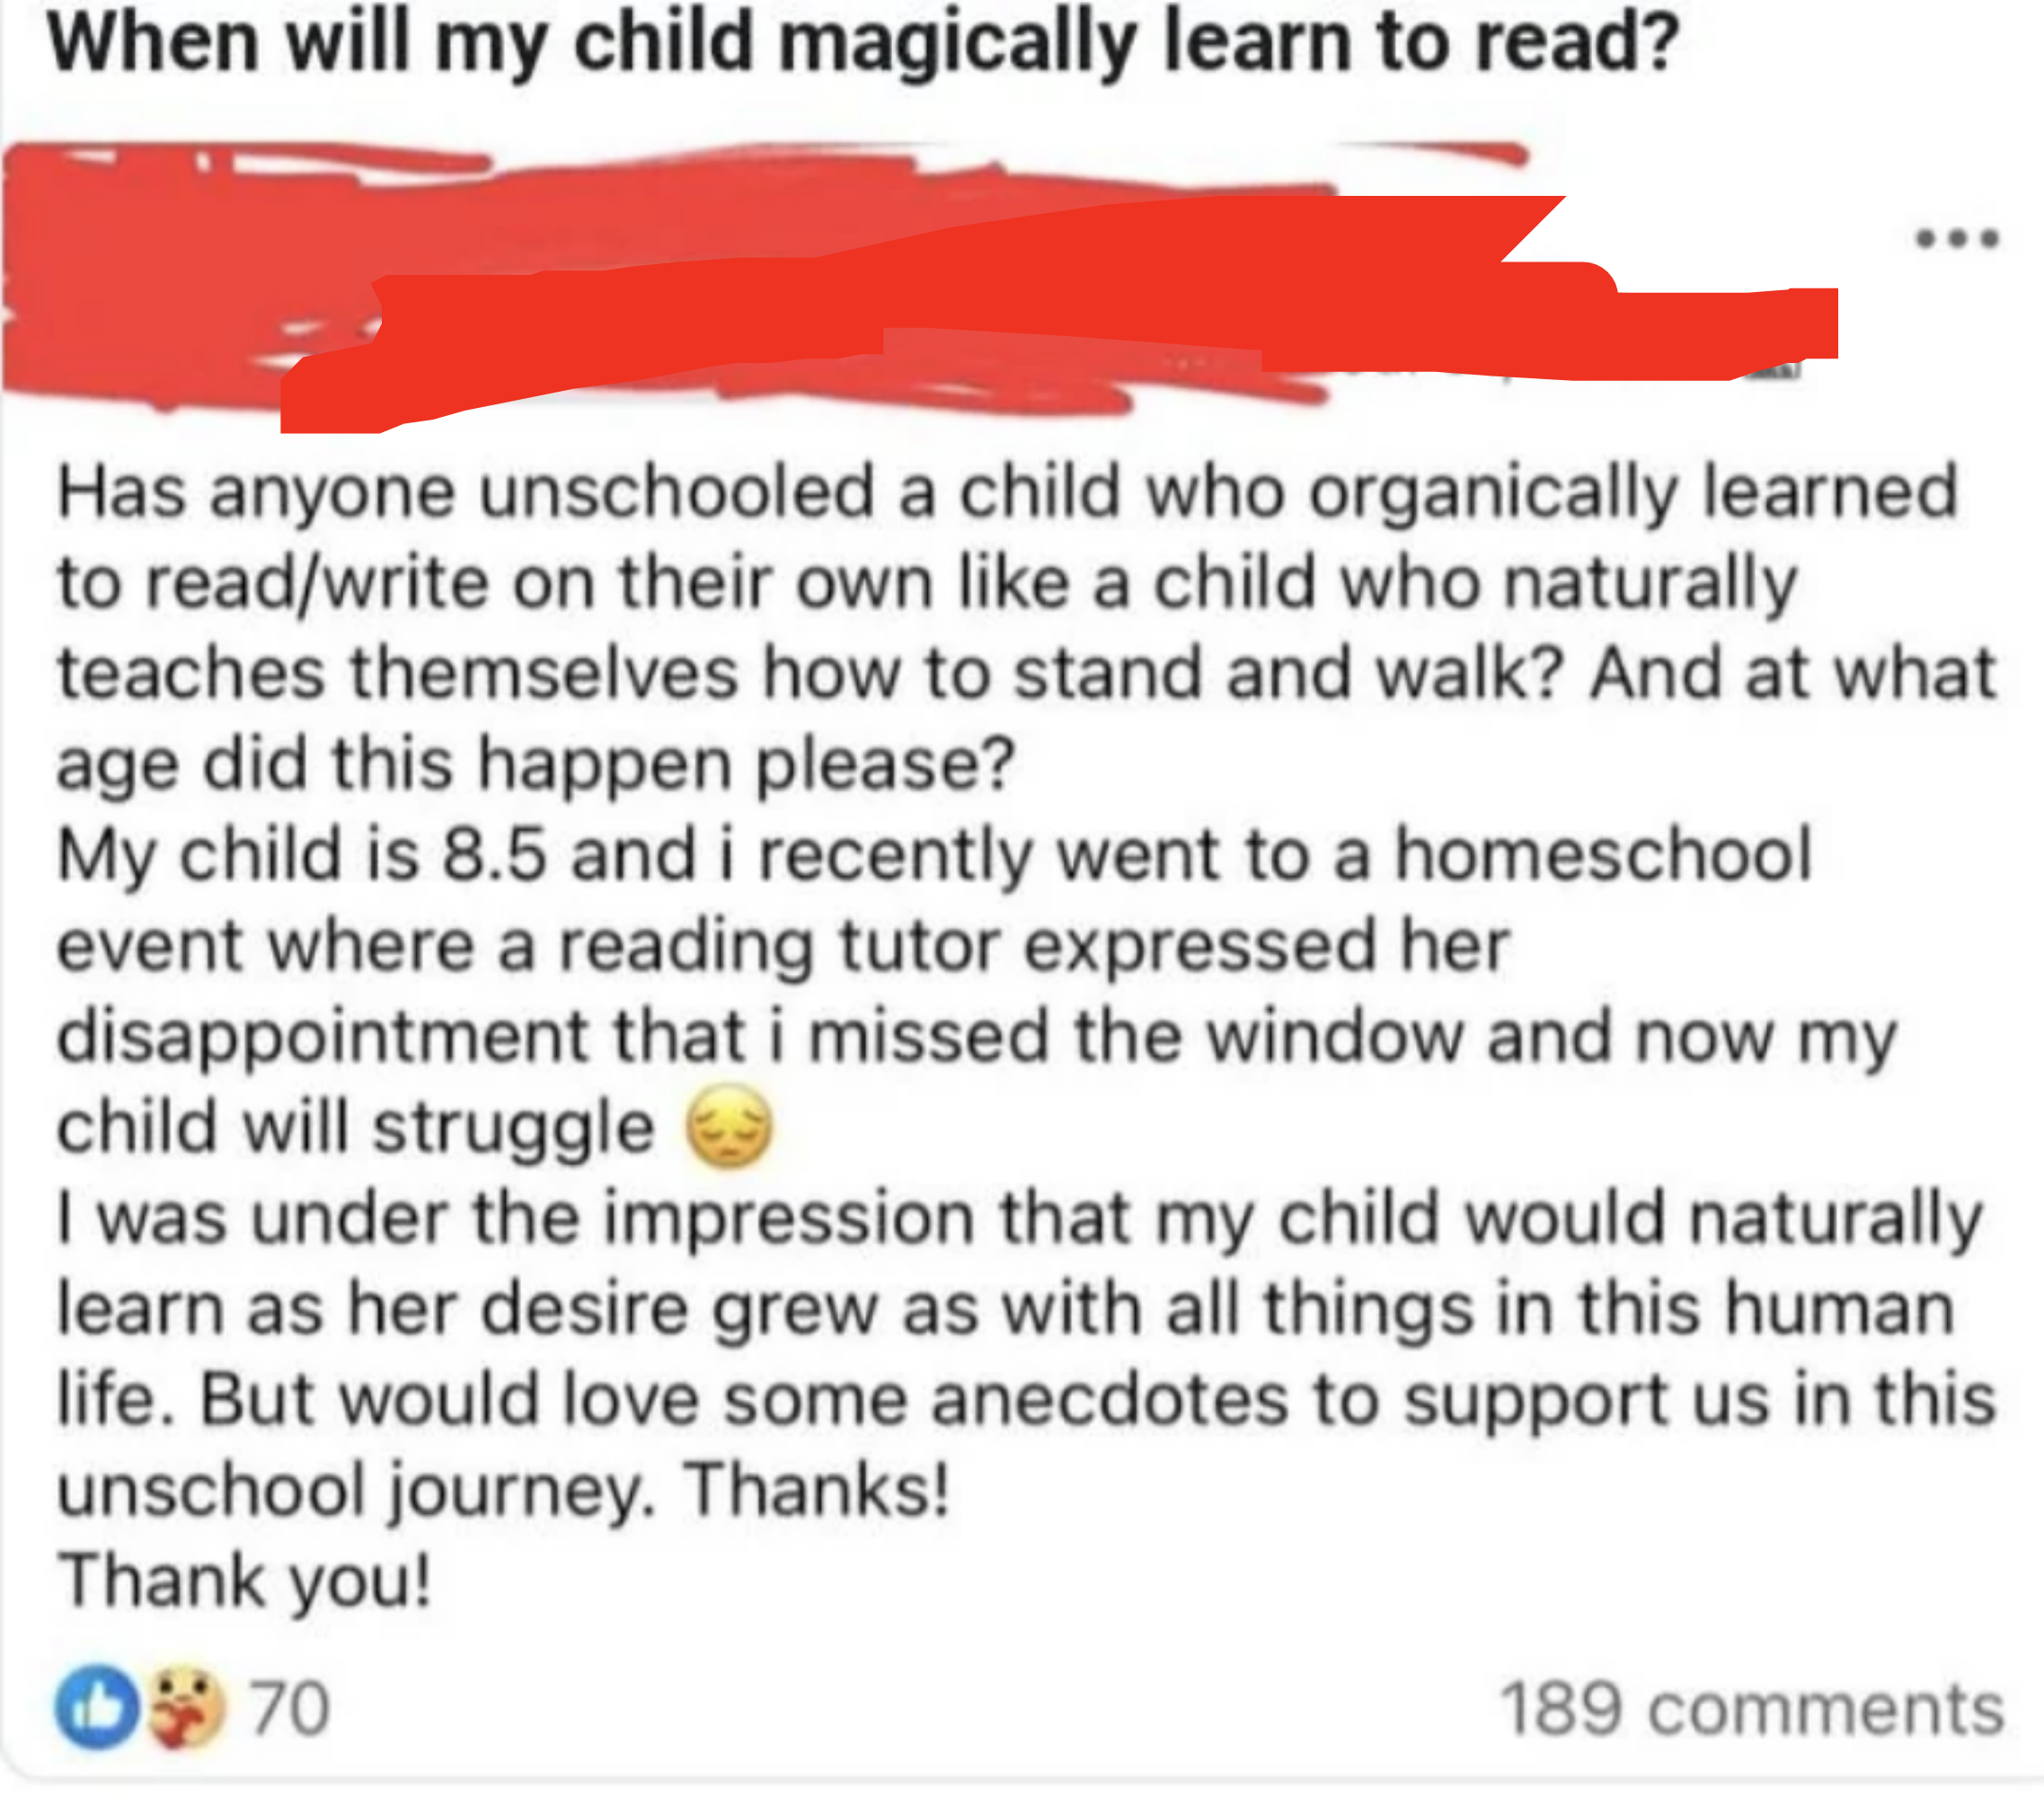 Facebook post with 189 comments: A parent of an 8-year-old asks about unschooling and children&#x27;s natural reading development, seeking anecdotes and support